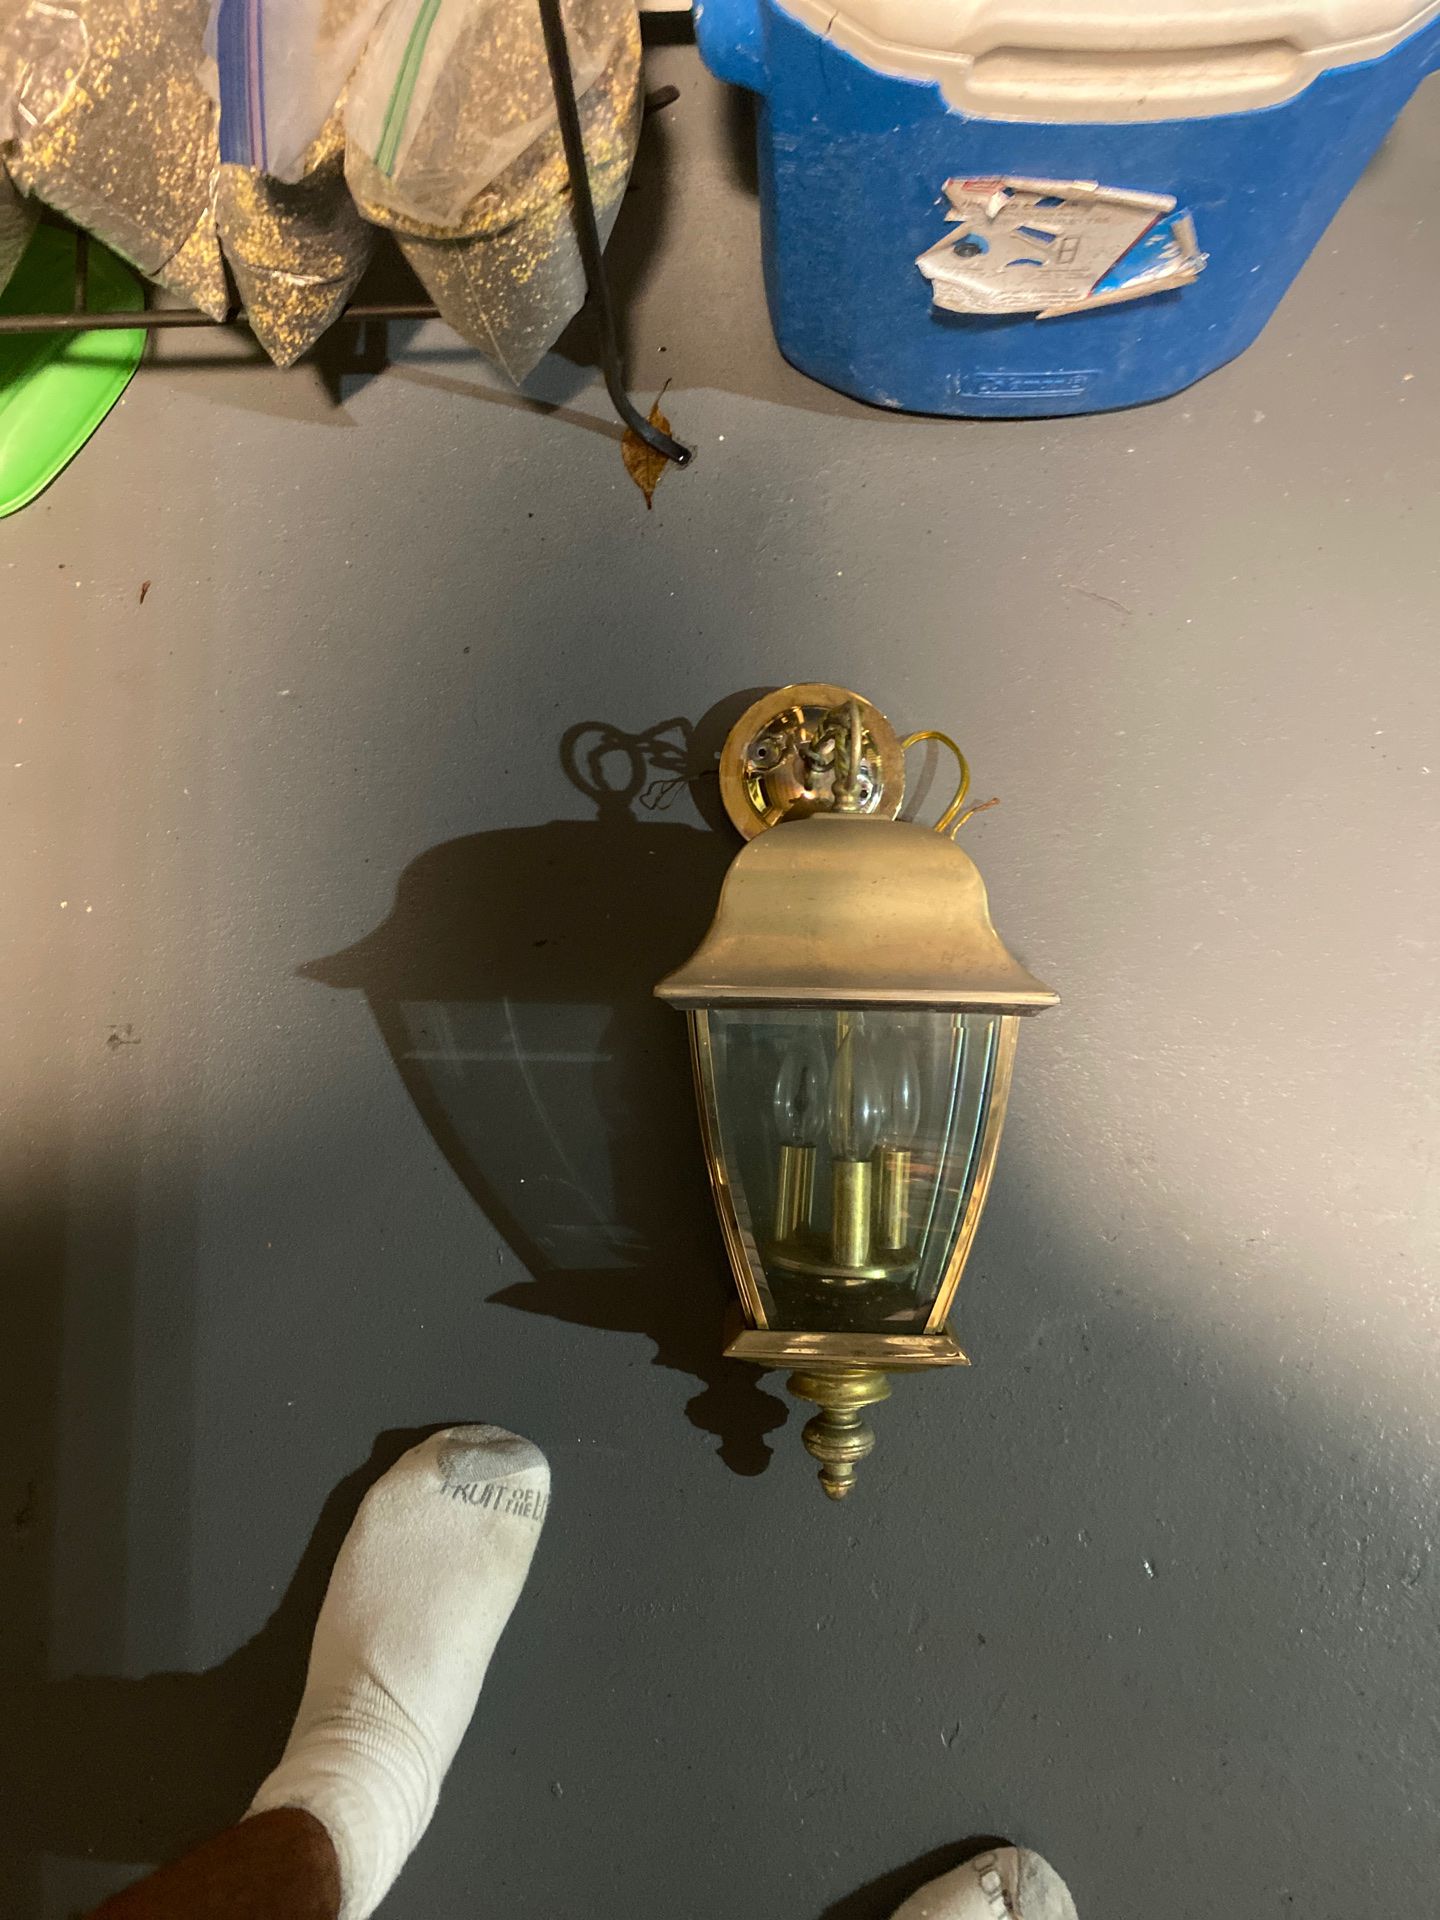 Solid Brass hanging light fixture works great and shines up great